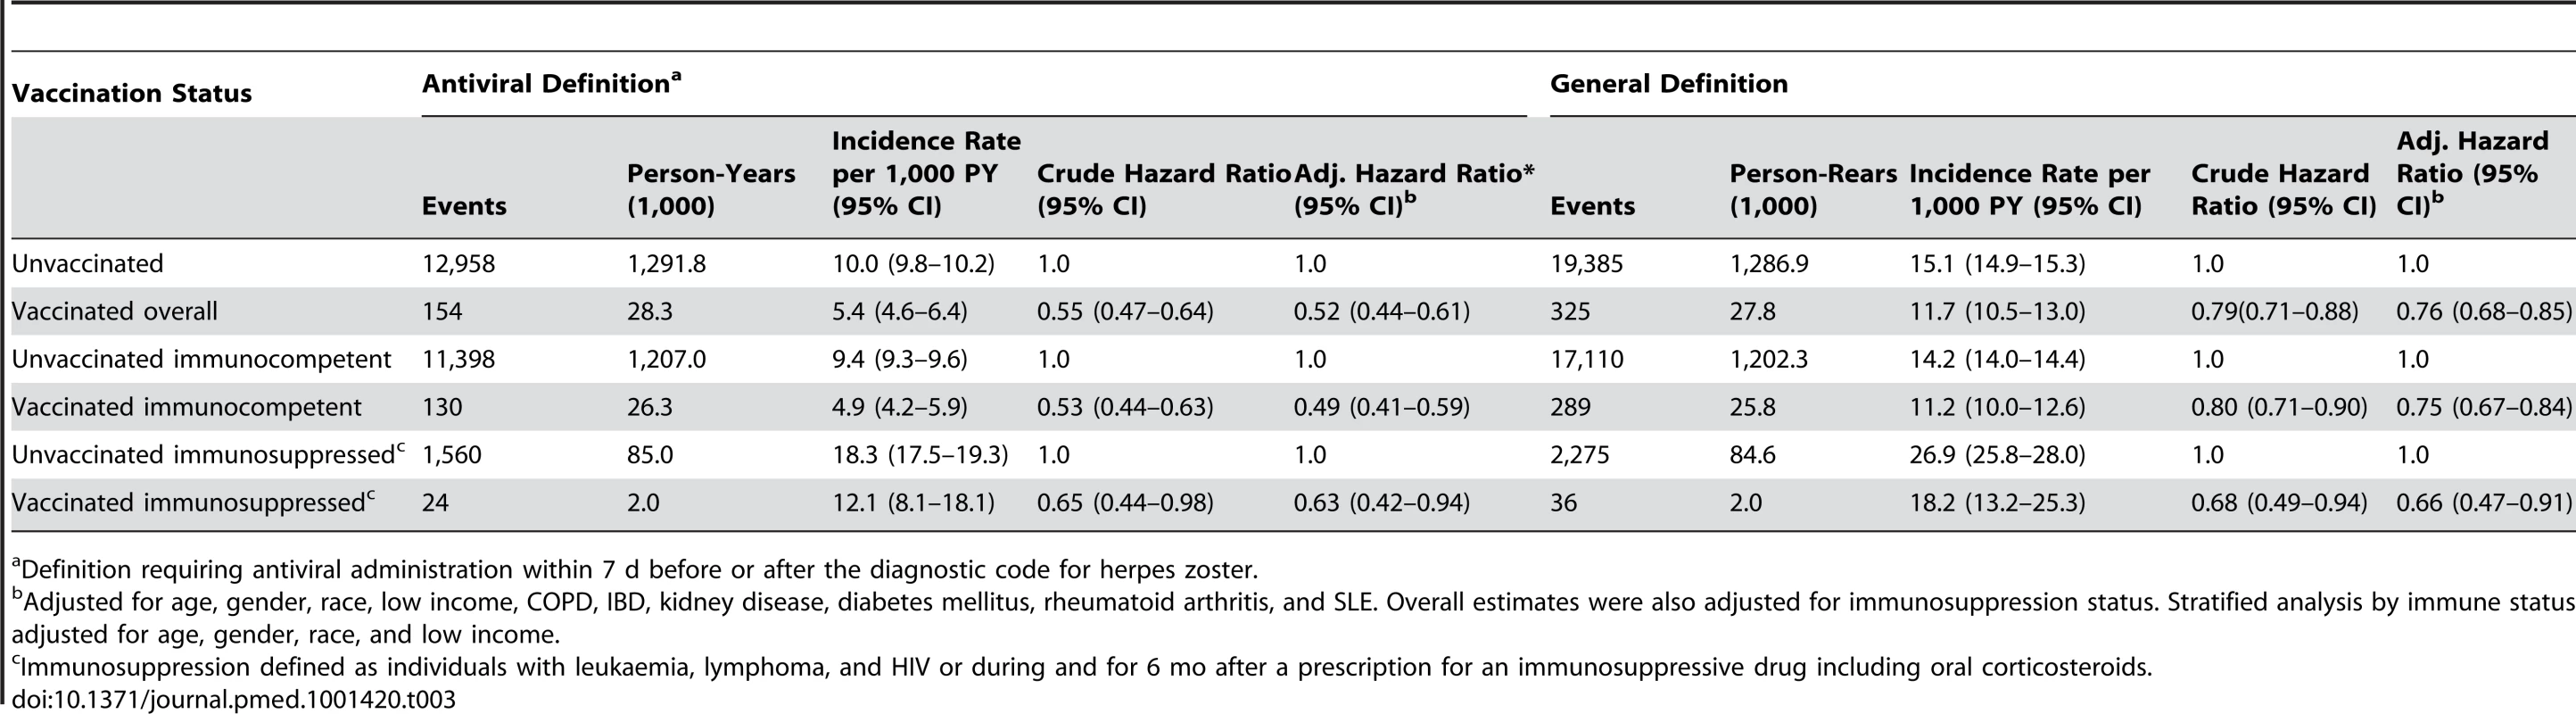 Zoster vaccine effectiveness against incident herpes zoster by characteristics and disease definition.